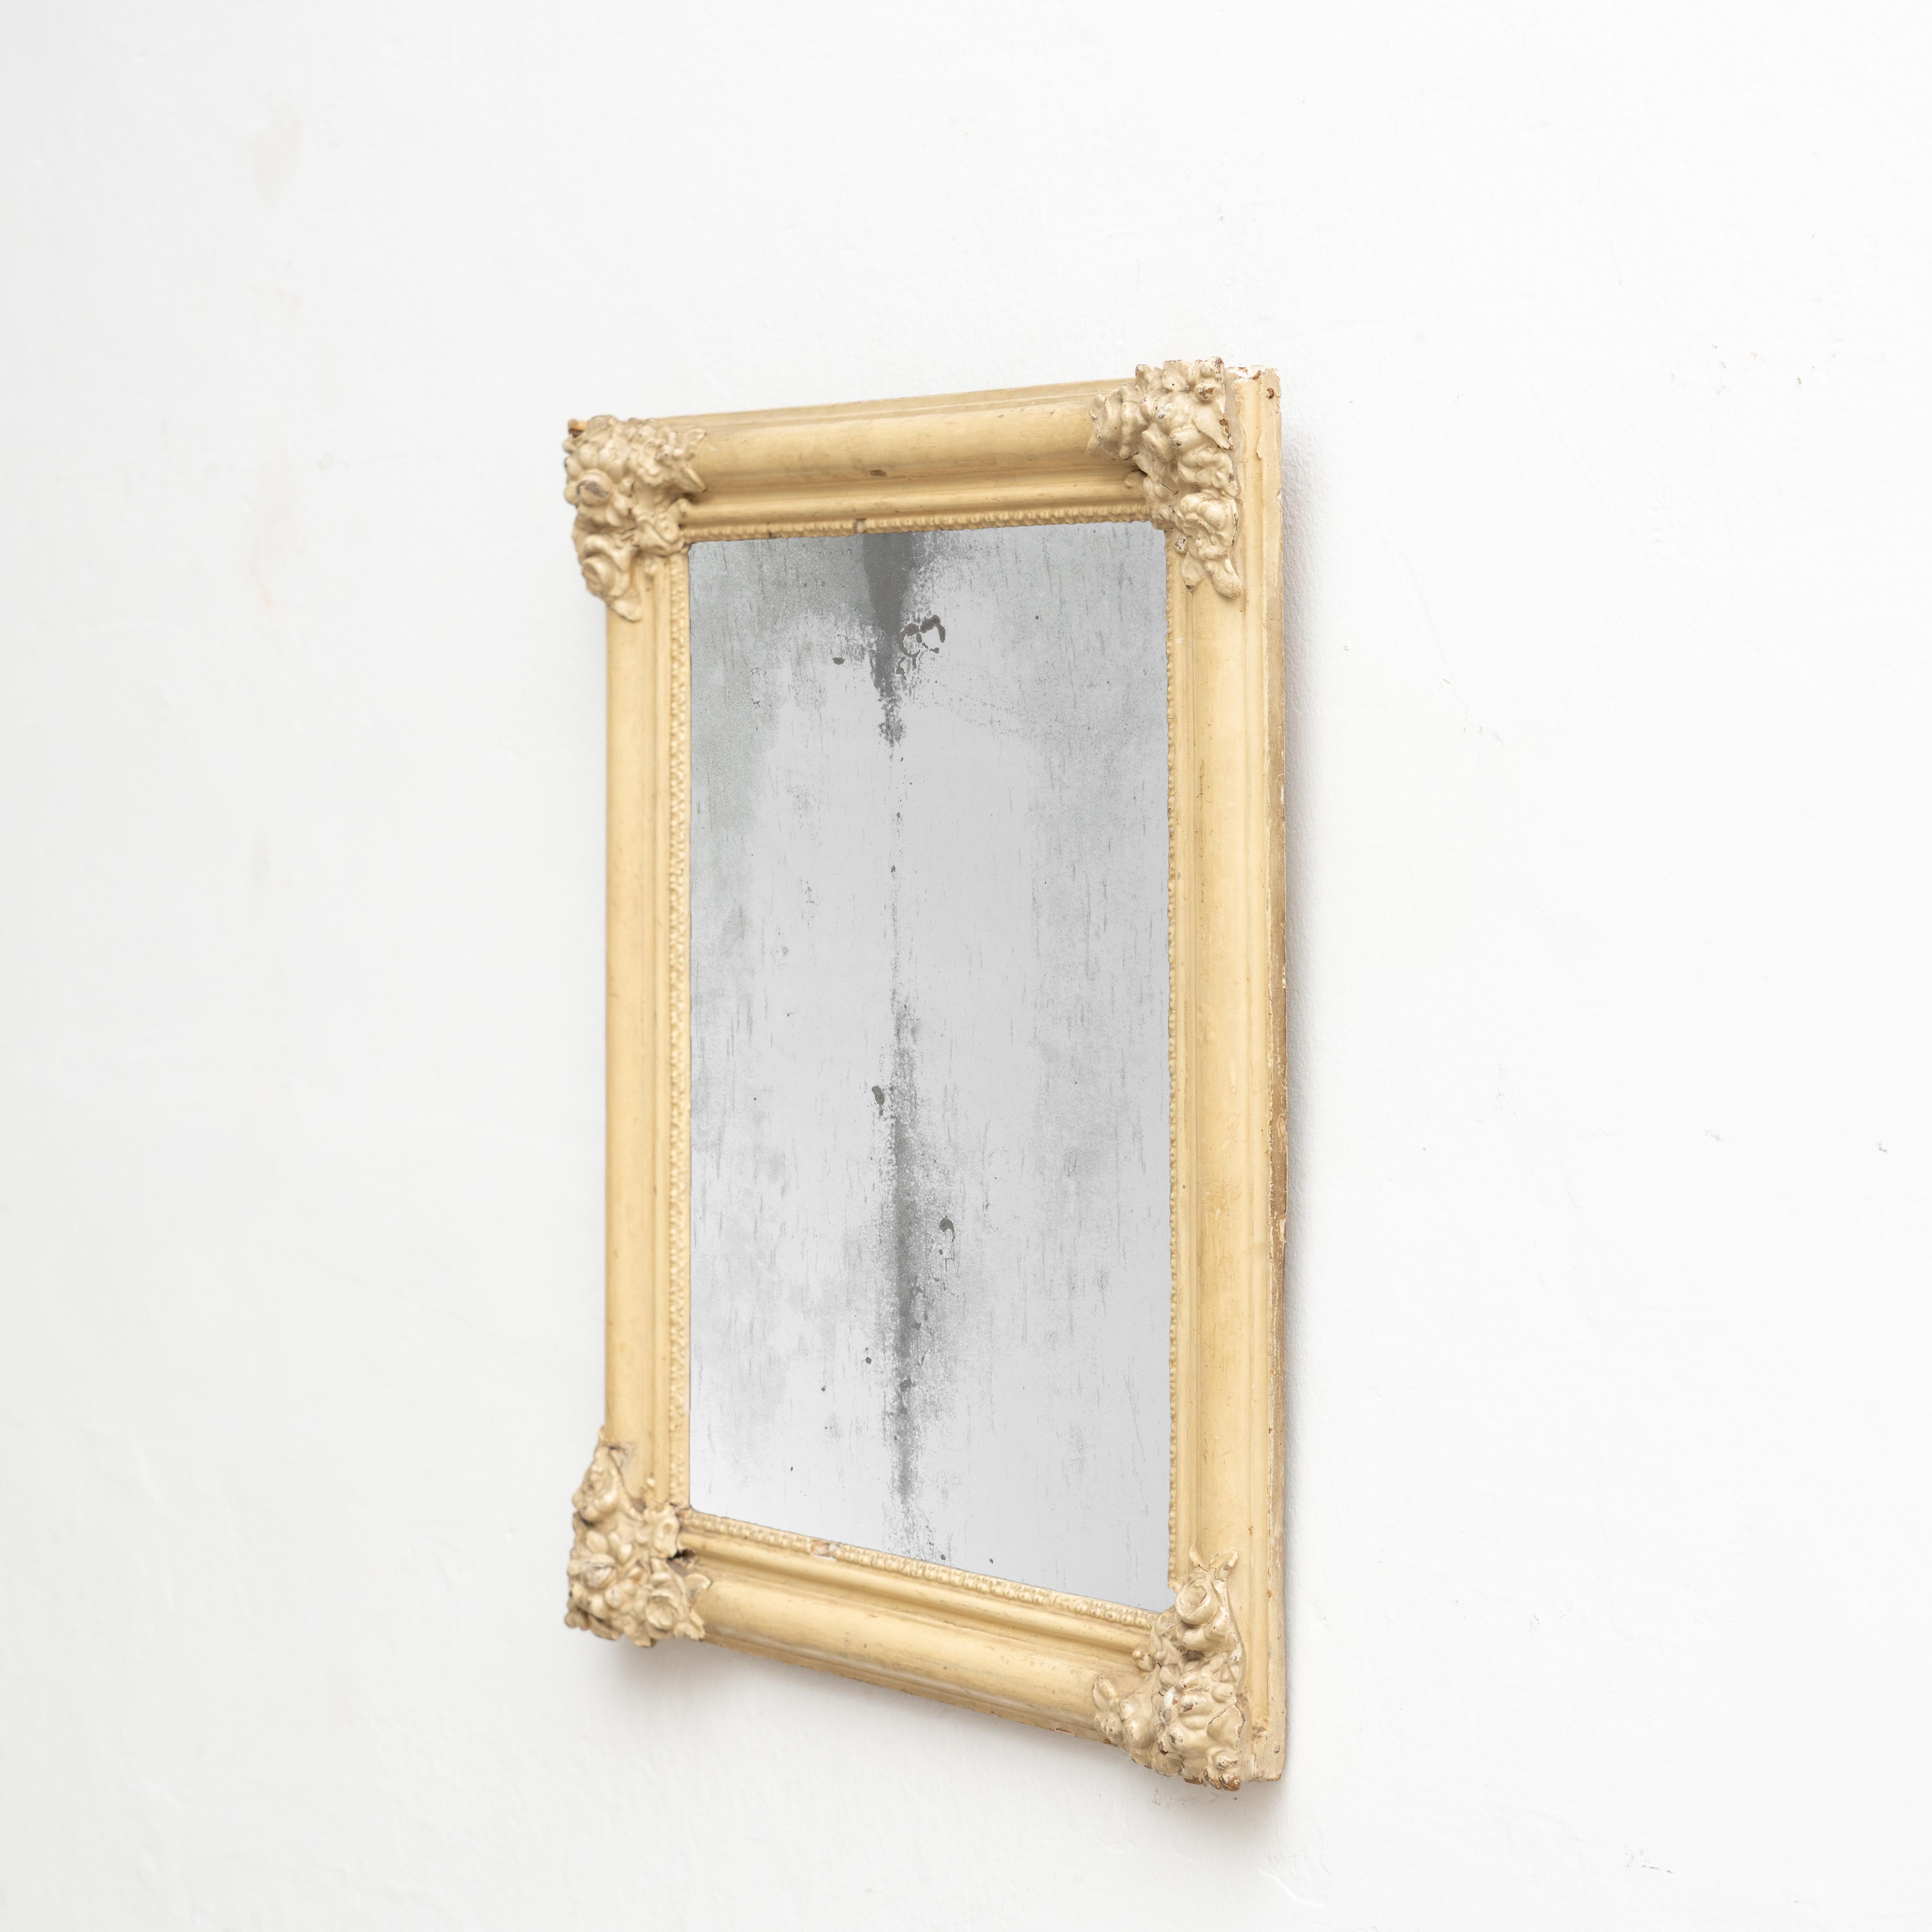 Mid-20th Century Spanish Mid-Century Modern Handcrafted Wood Mirror, circa 1950 For Sale